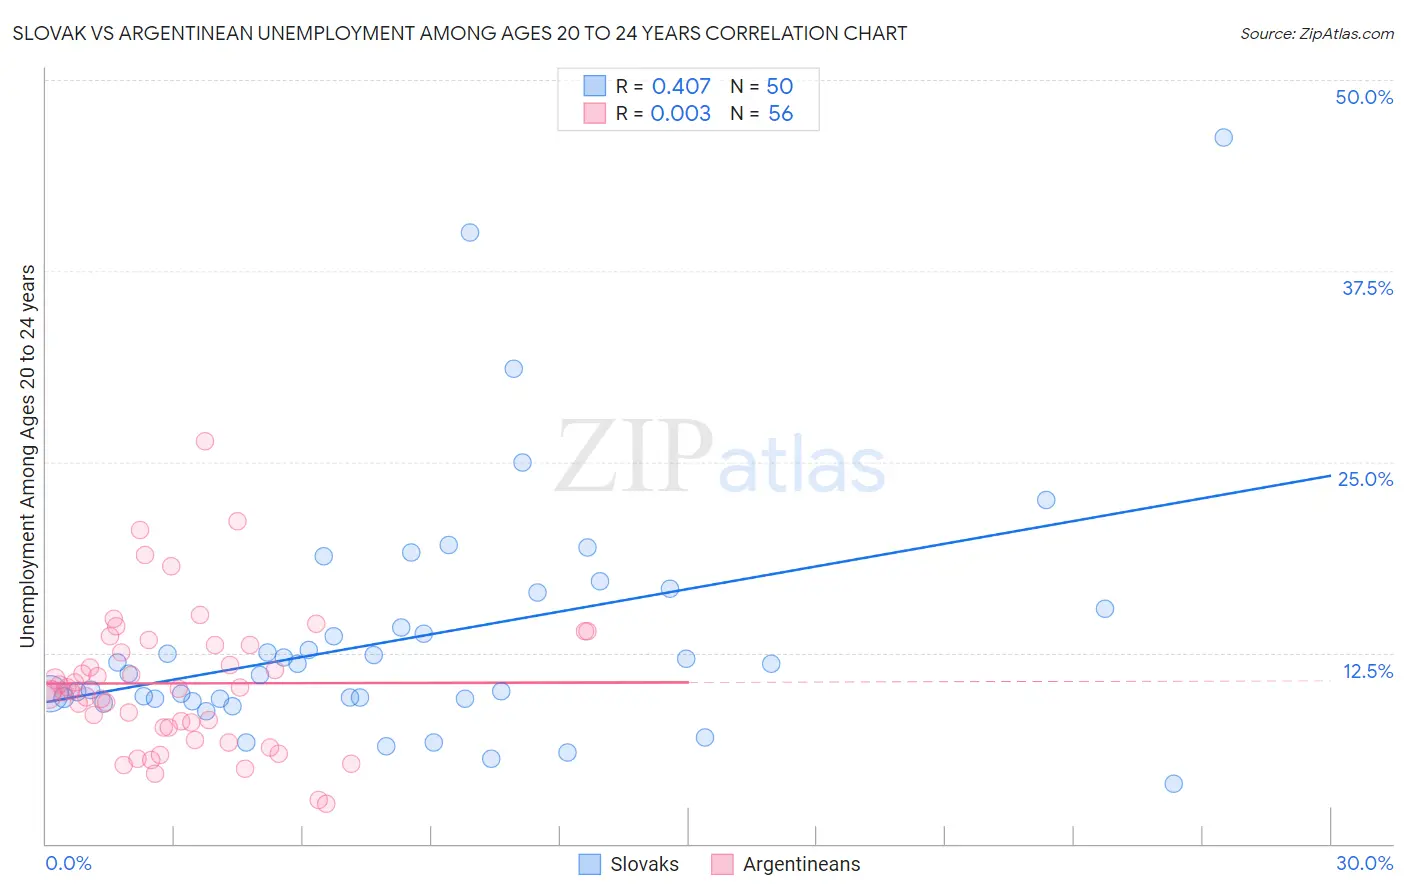 Slovak vs Argentinean Unemployment Among Ages 20 to 24 years